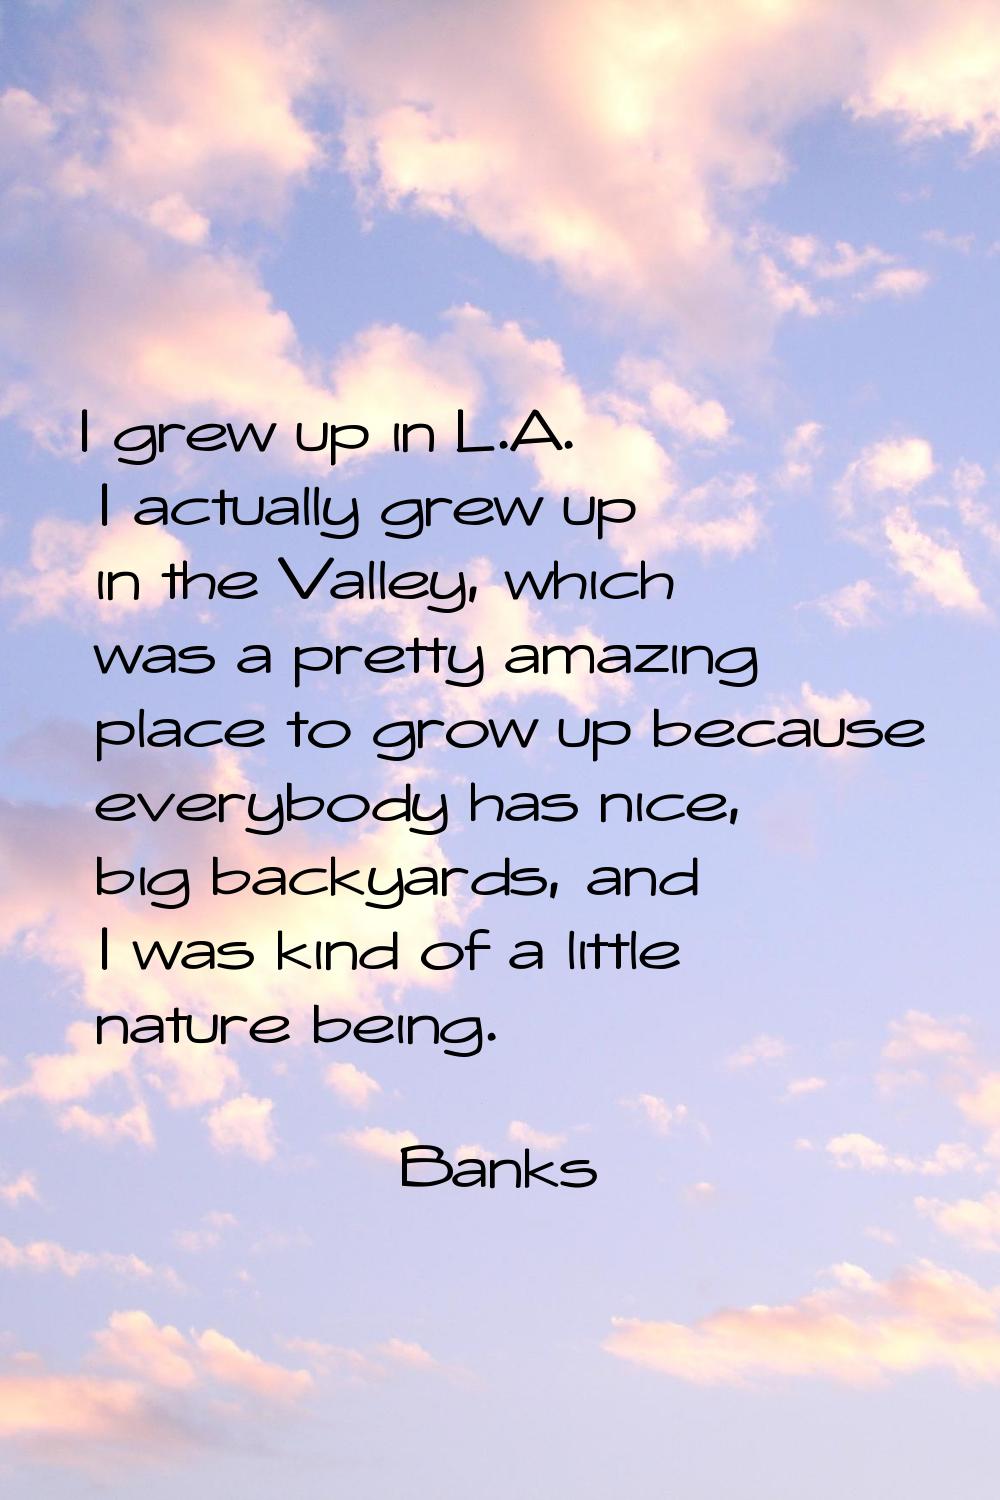 I grew up in L.A. I actually grew up in the Valley, which was a pretty amazing place to grow up bec